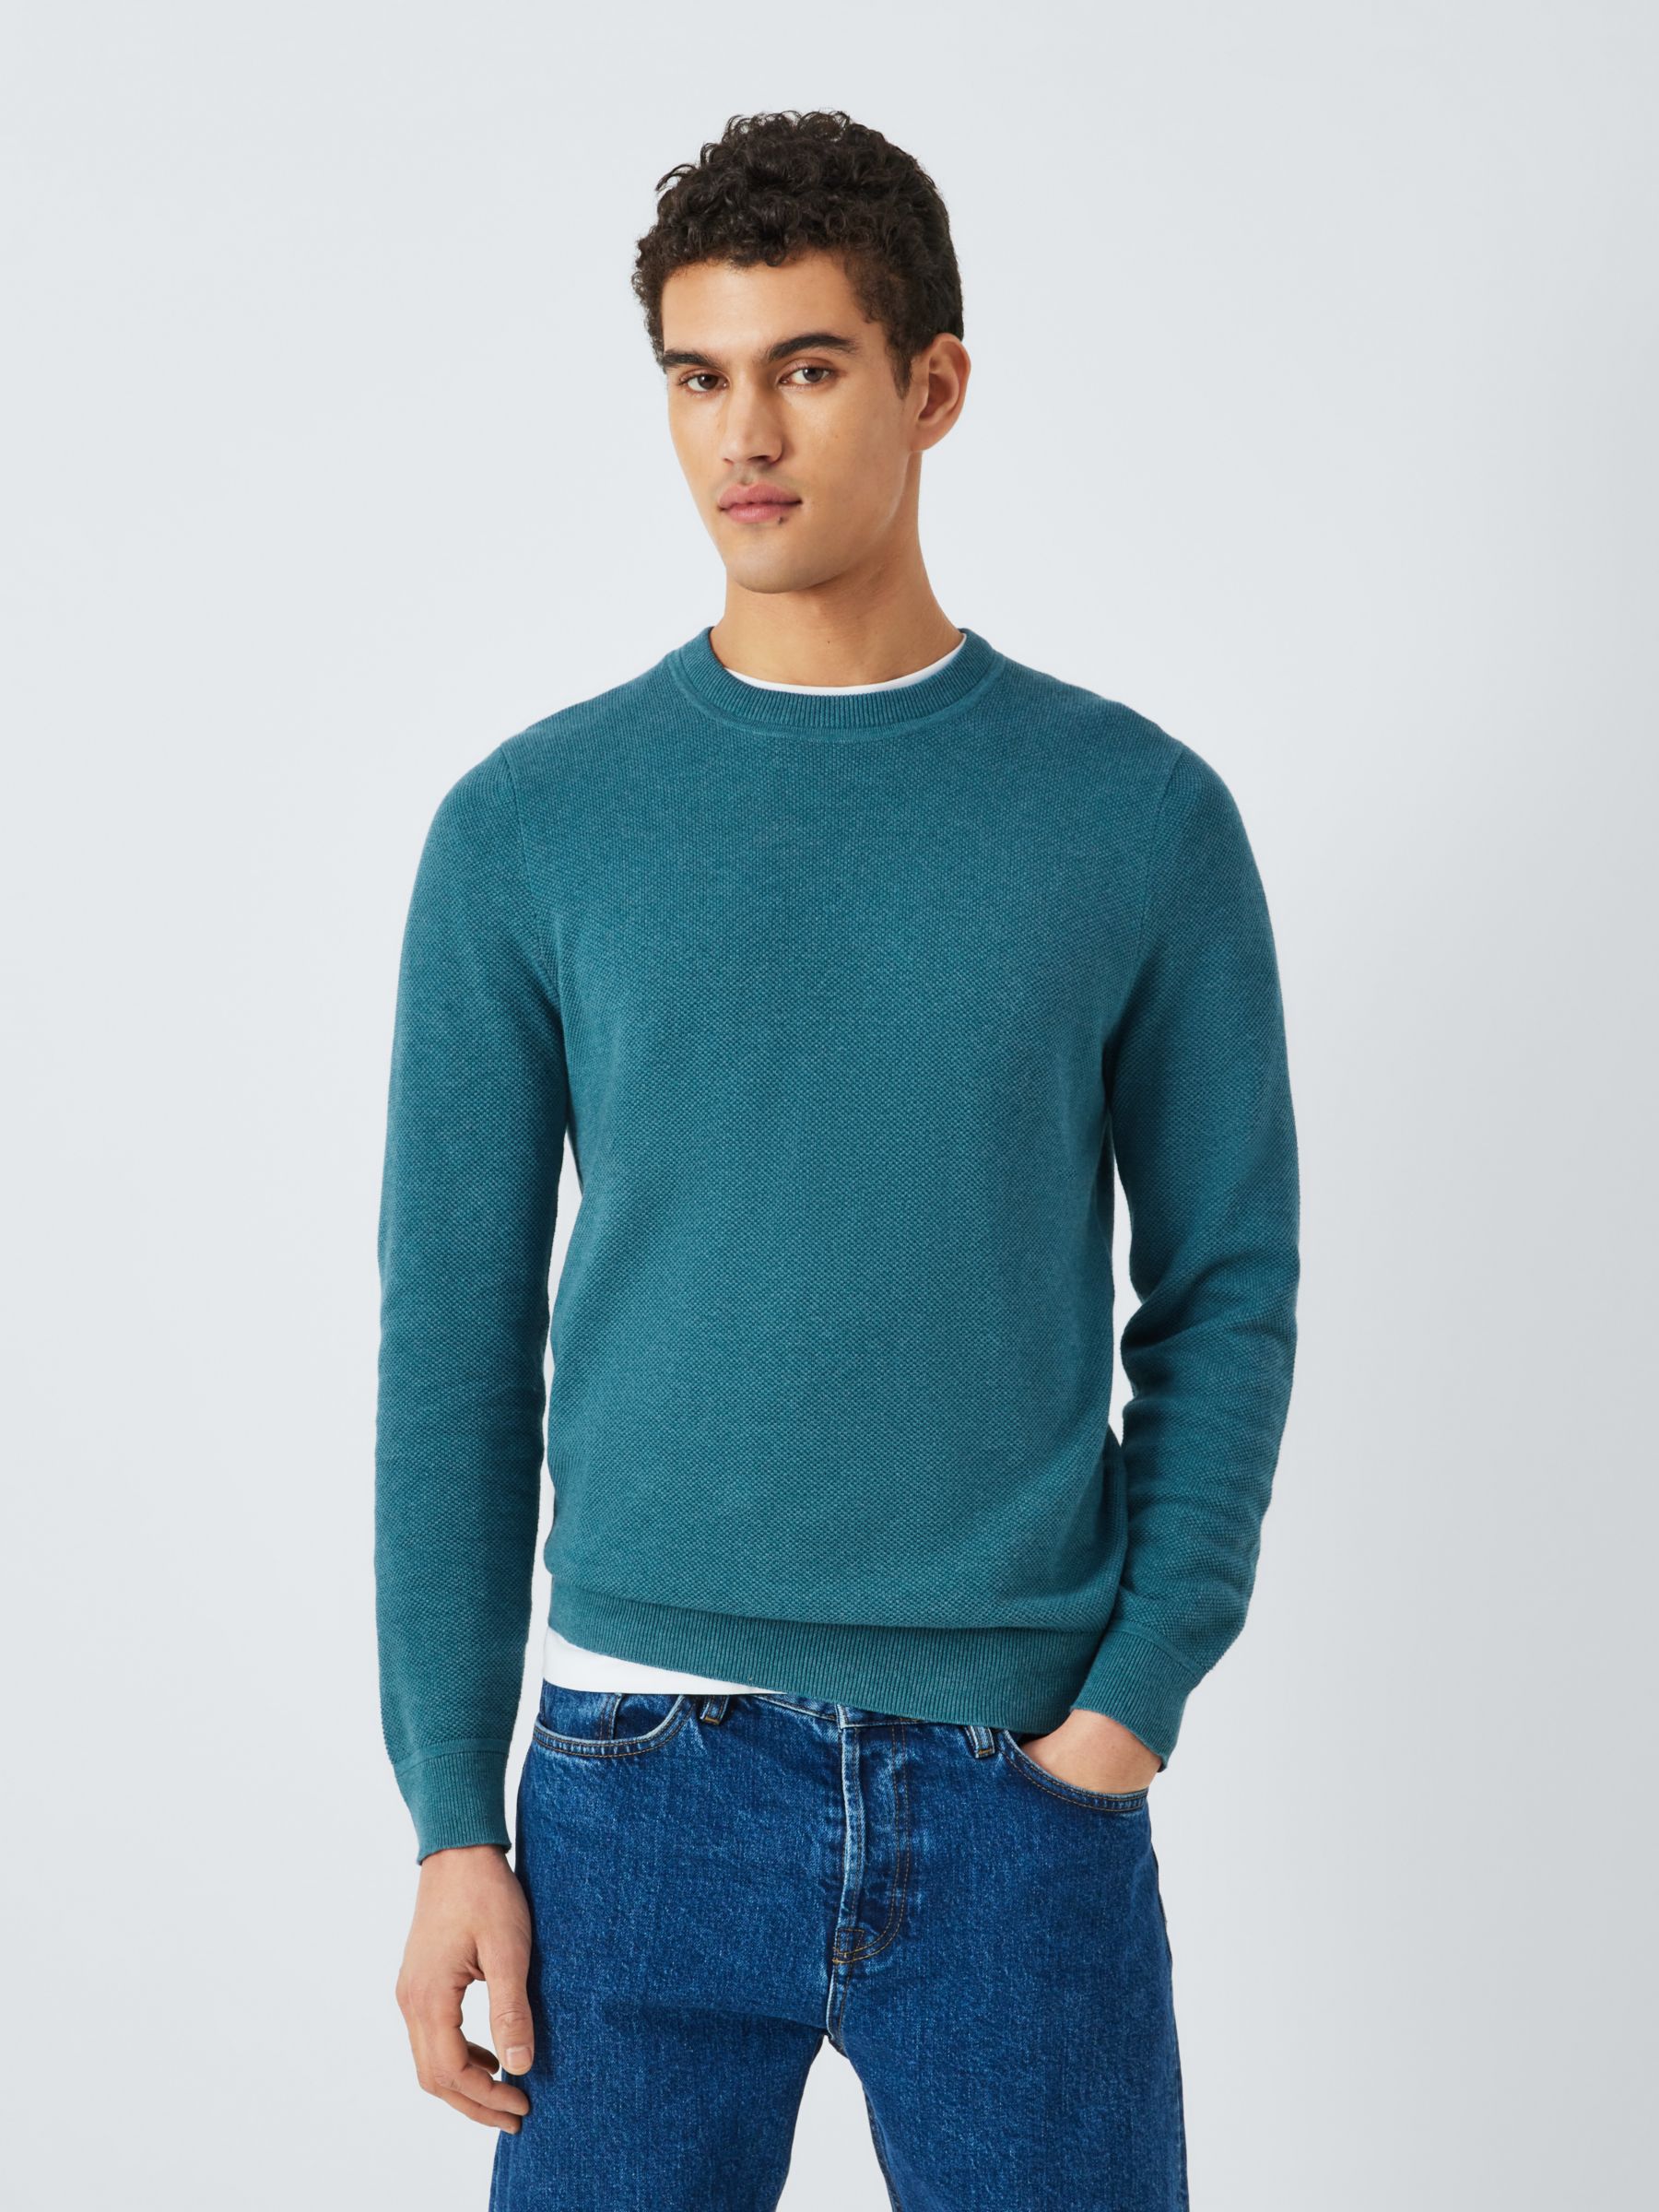 John Lewis Cotton Knitted Jumper, Blue Teal, S